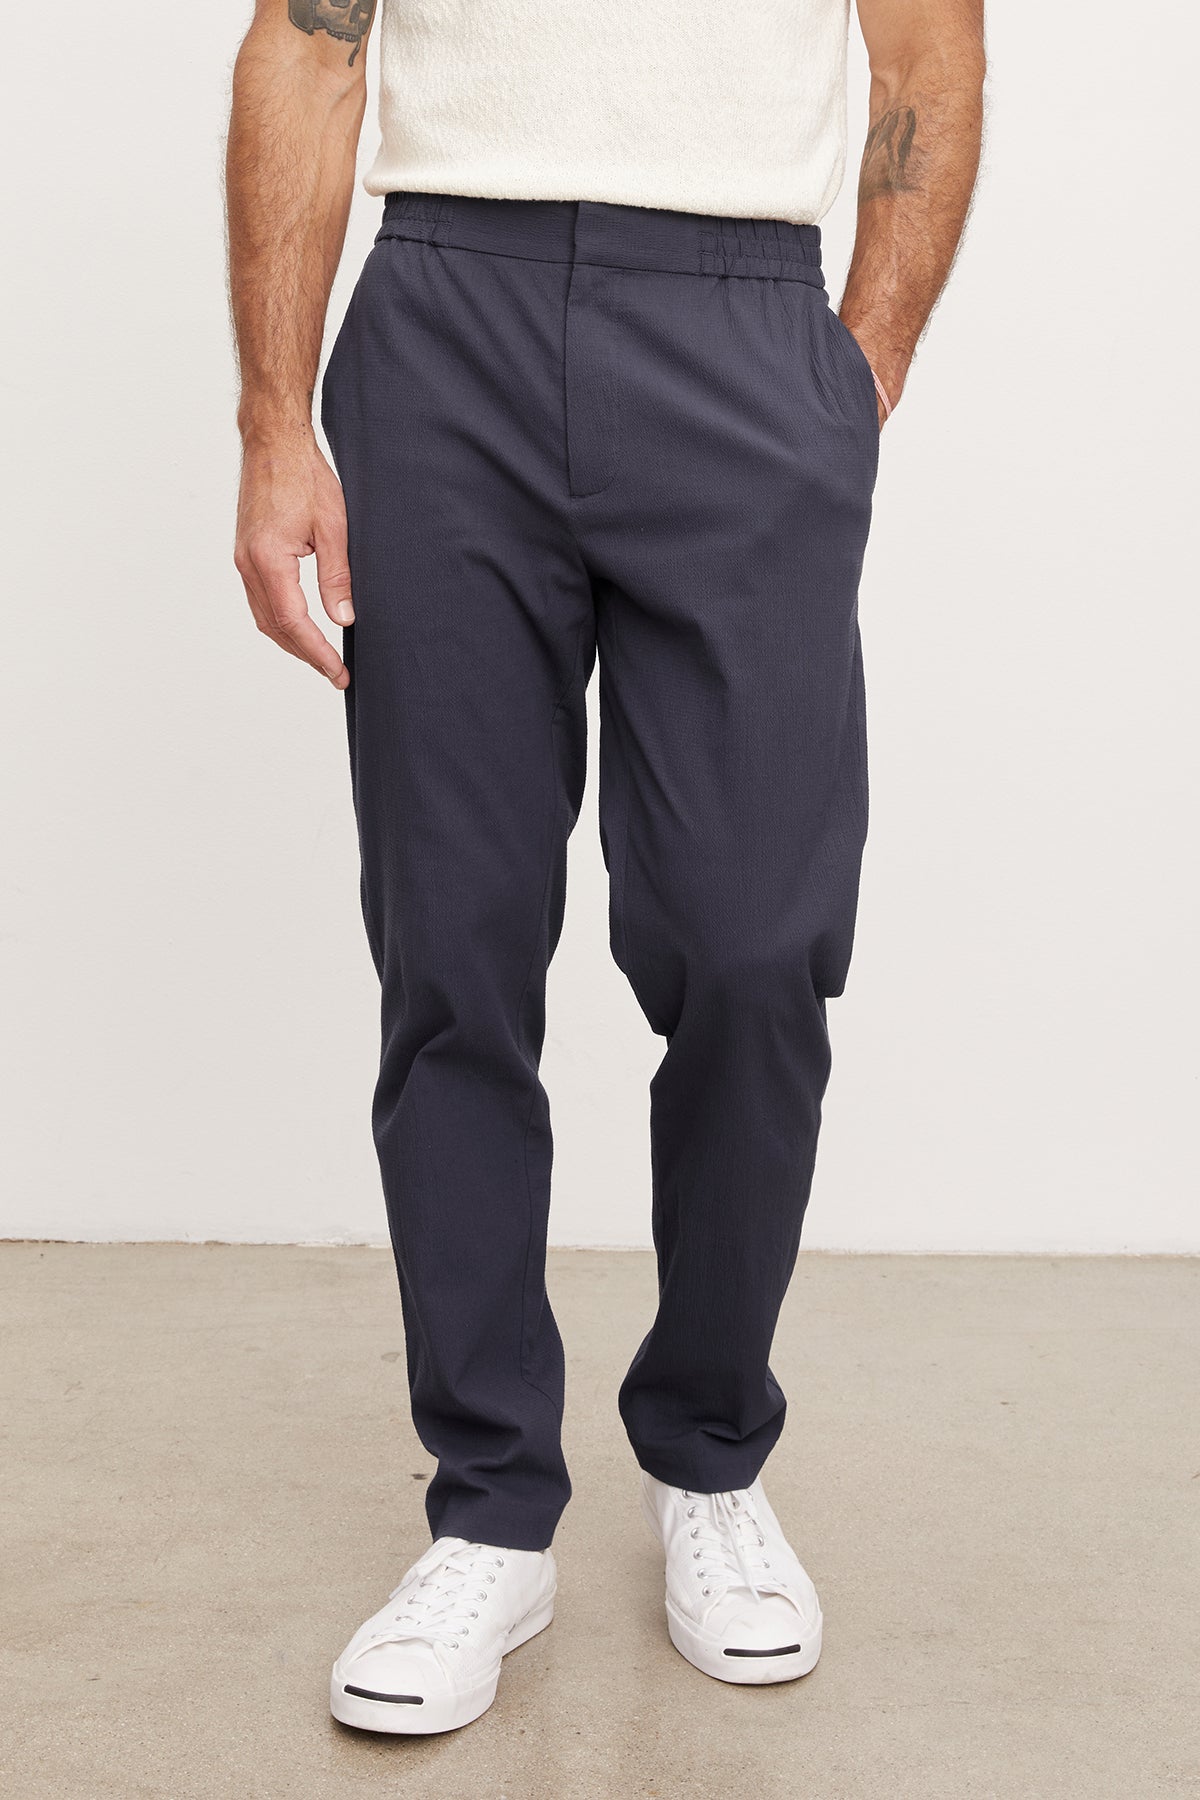 A man wearing navy blue seersucker cotton WILLEM PANTS by Velvet by Graham & Spencer and white sneakers, standing with his hands on his hips. Only the lower half of his body is visible.-36909312704705